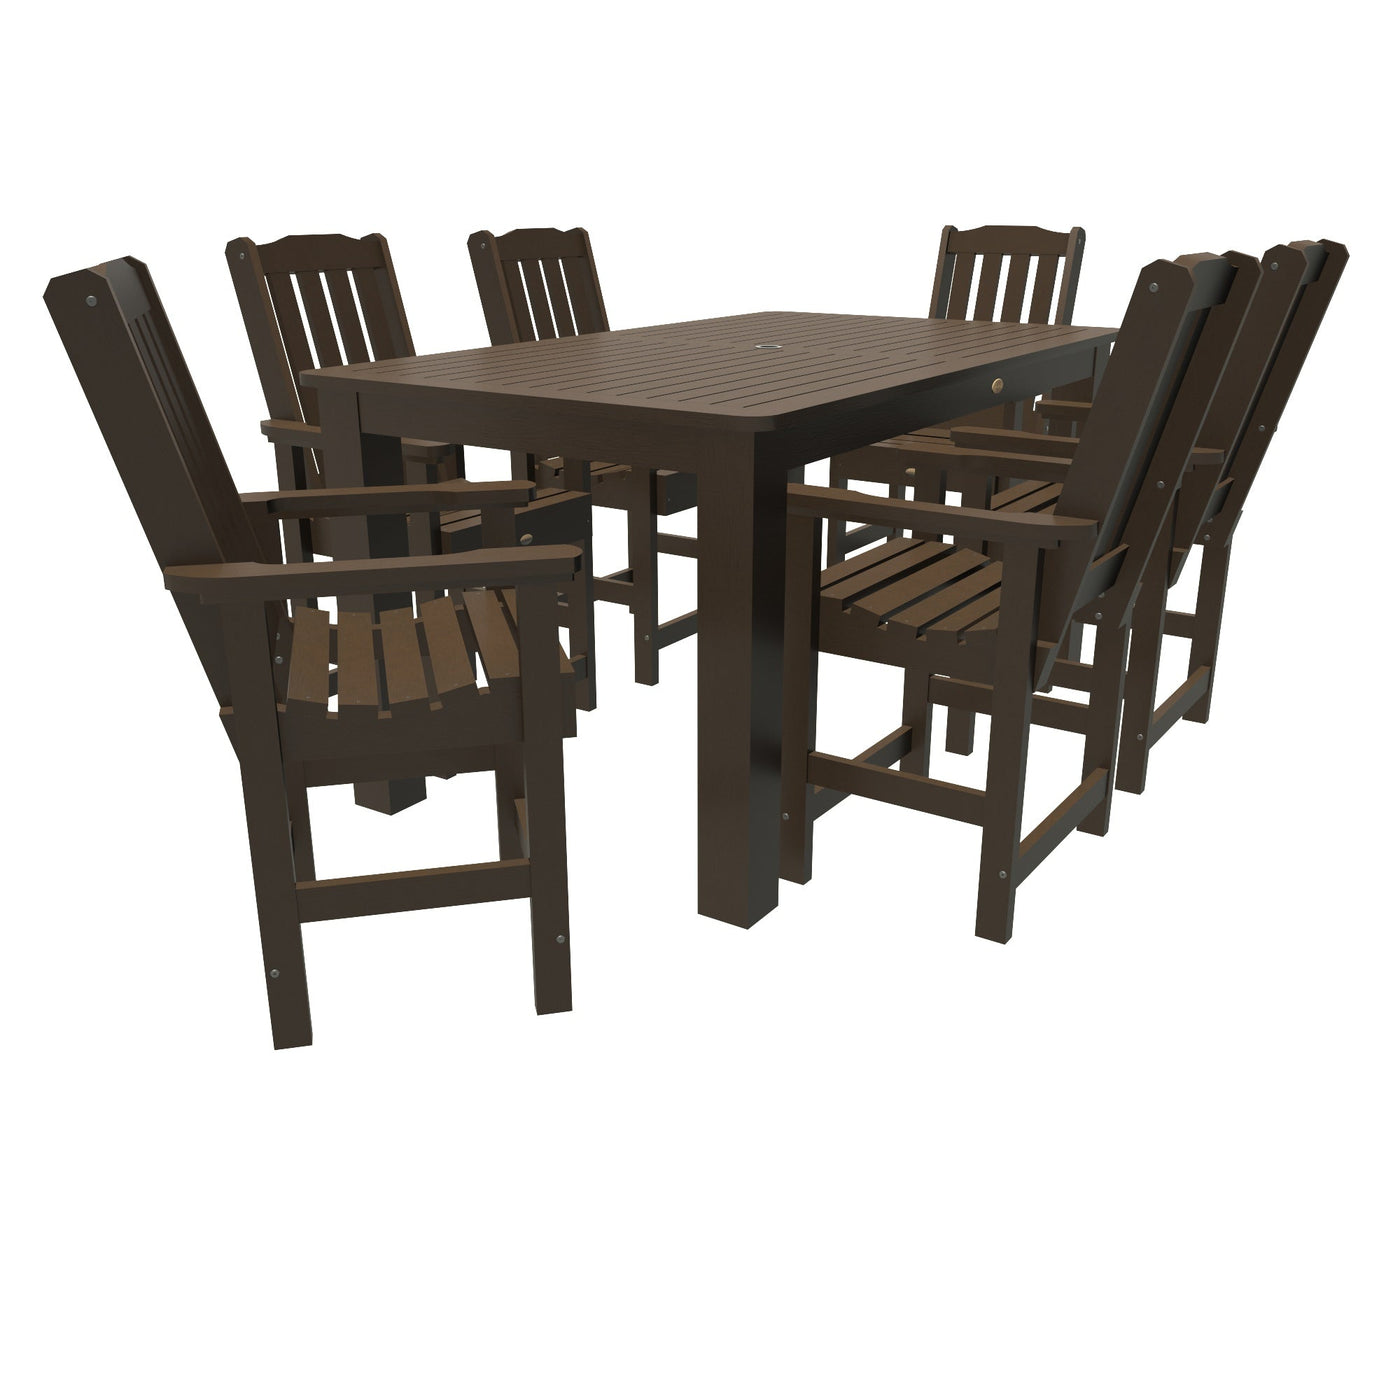 Lehigh 7pc Rectangular Outdoor Dining Set 42in x 72in - Counter Height Dining Highwood USA Weathered Acorn 